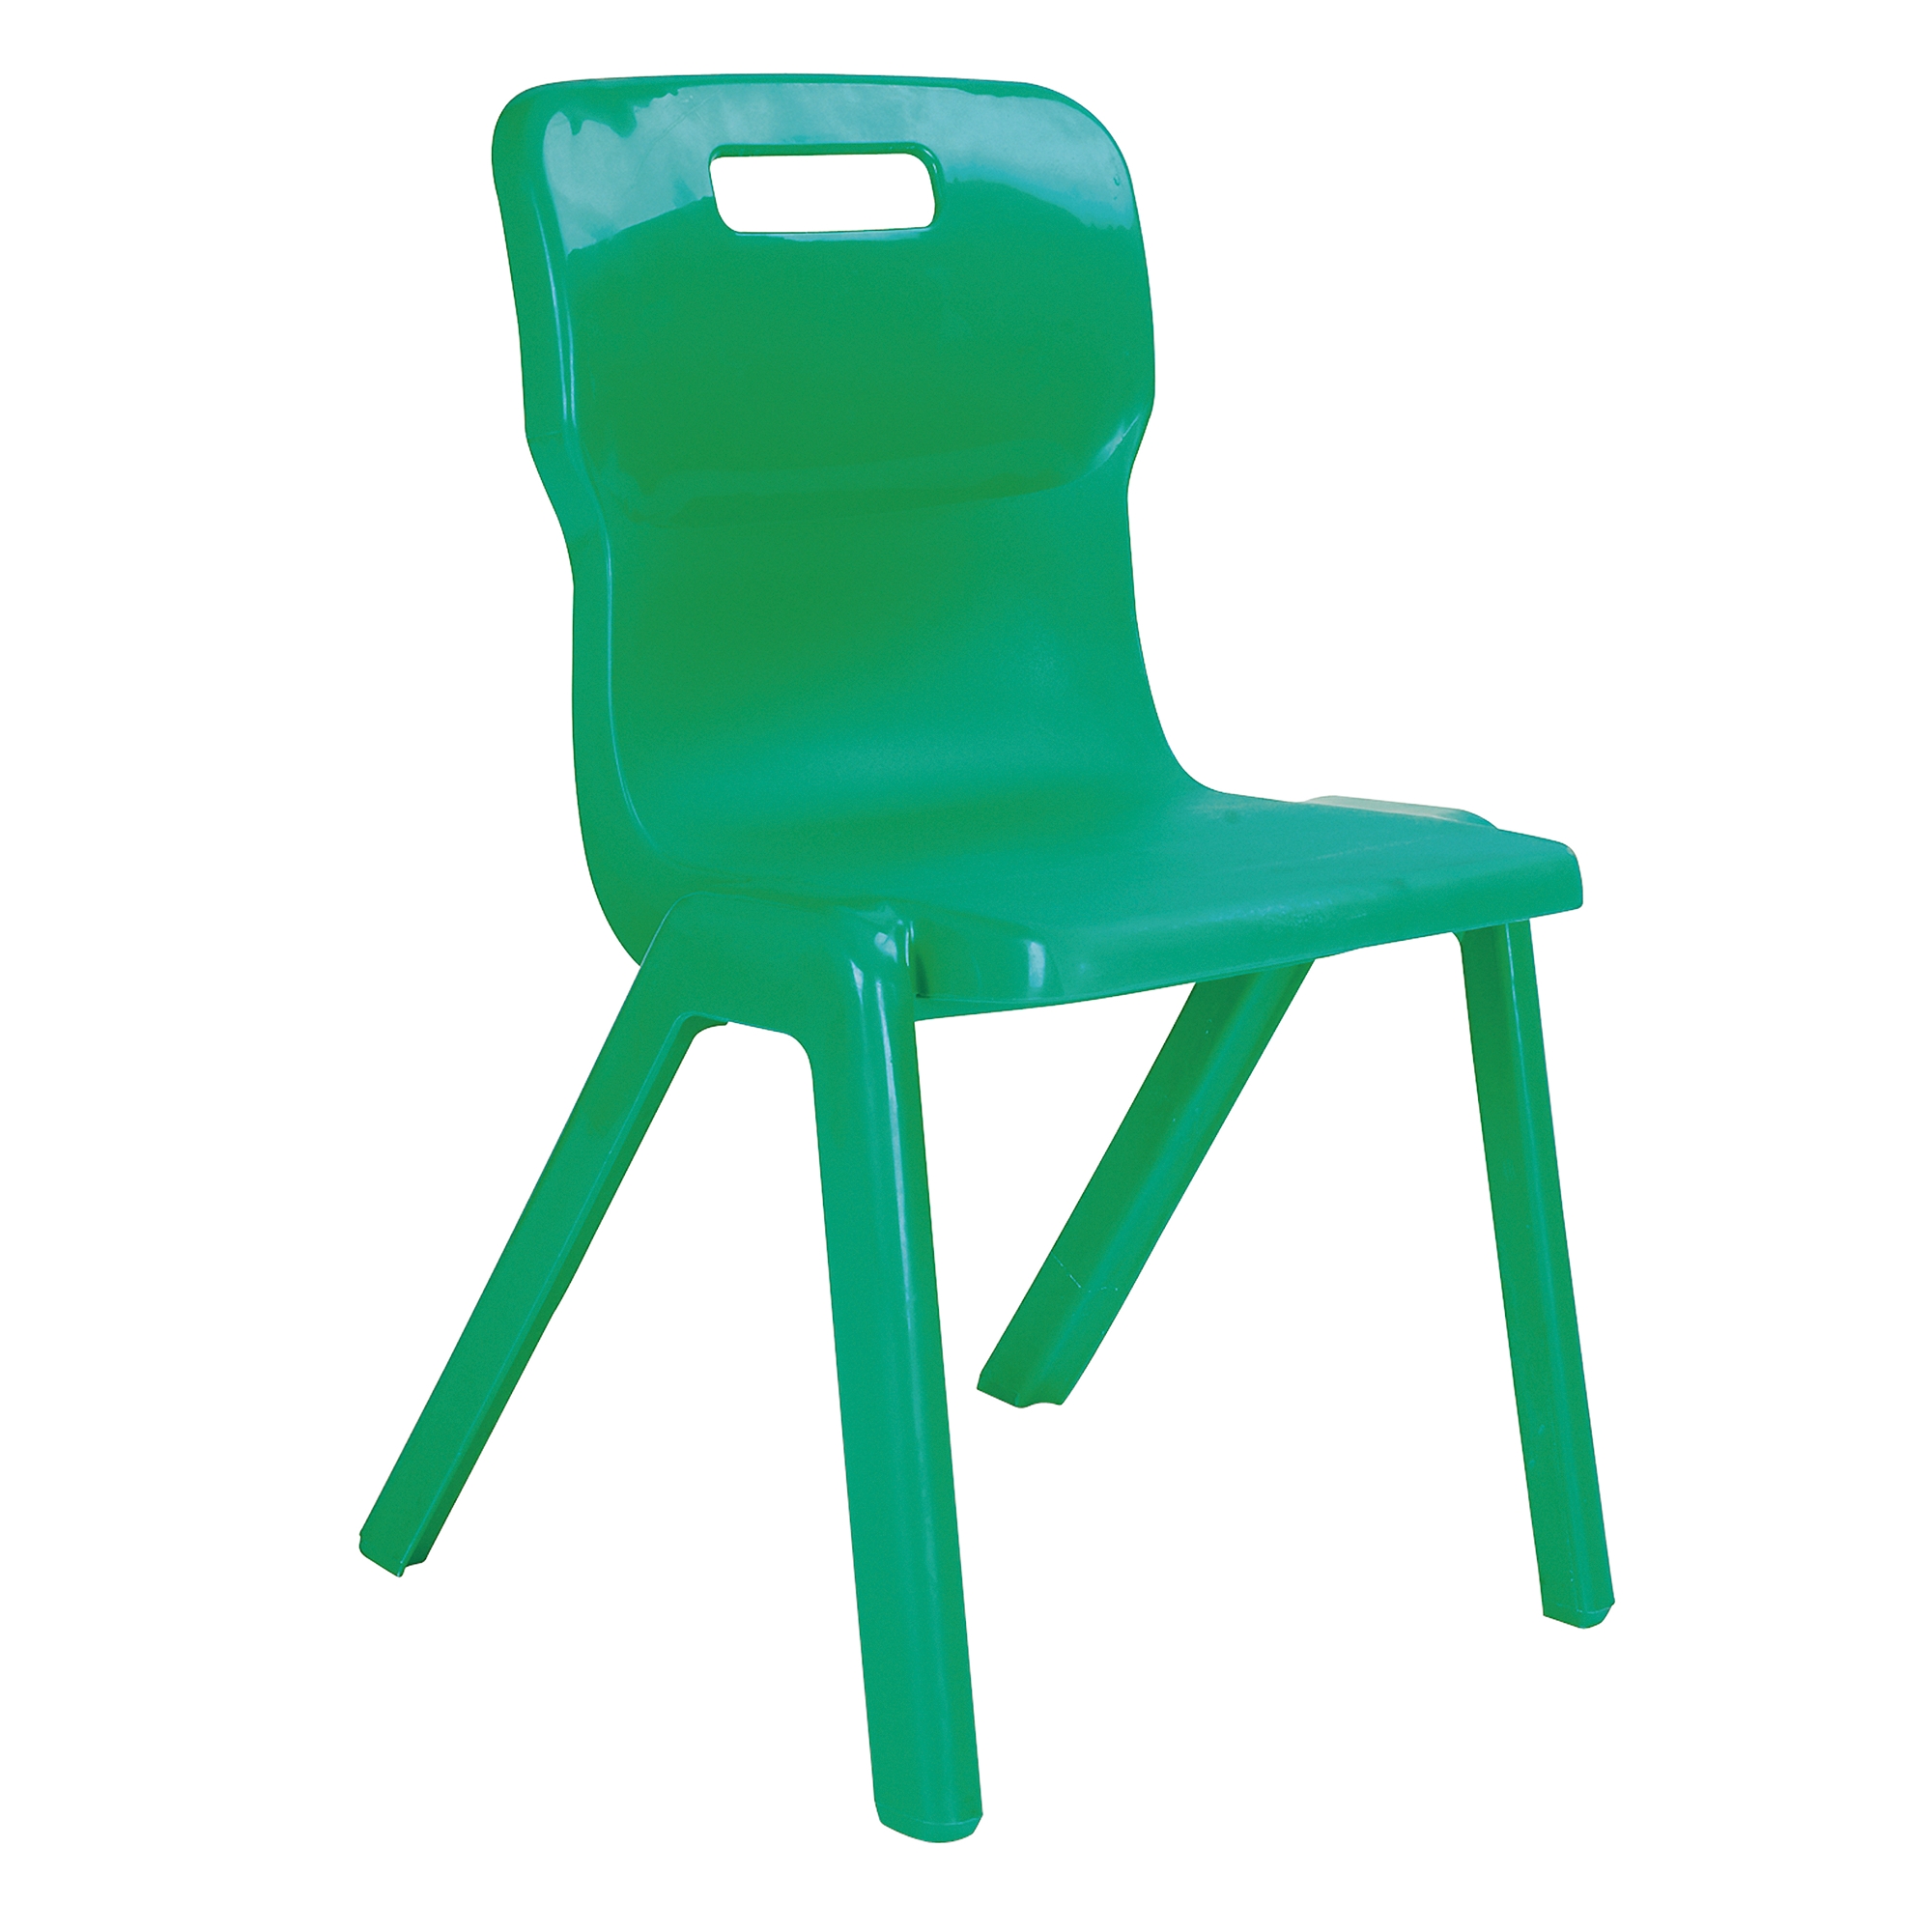 One Piece Titan Chair - Size 4 Ages 8-11 Green